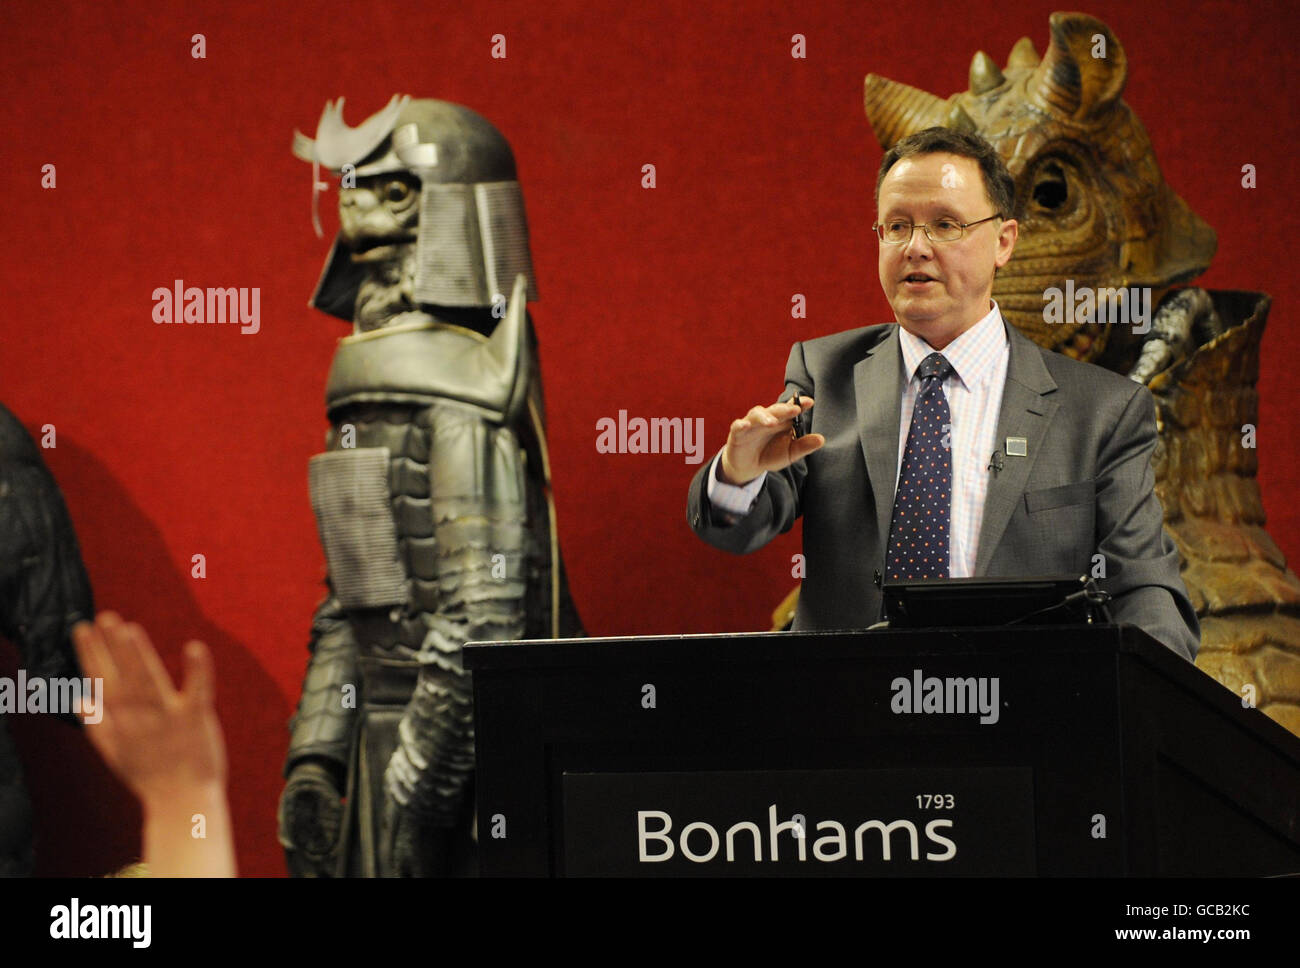 Bonhams auctioneer John Baddeley conducts a sale of props and costumes from the BBC TV series Dr Who in London today. Stock Photo